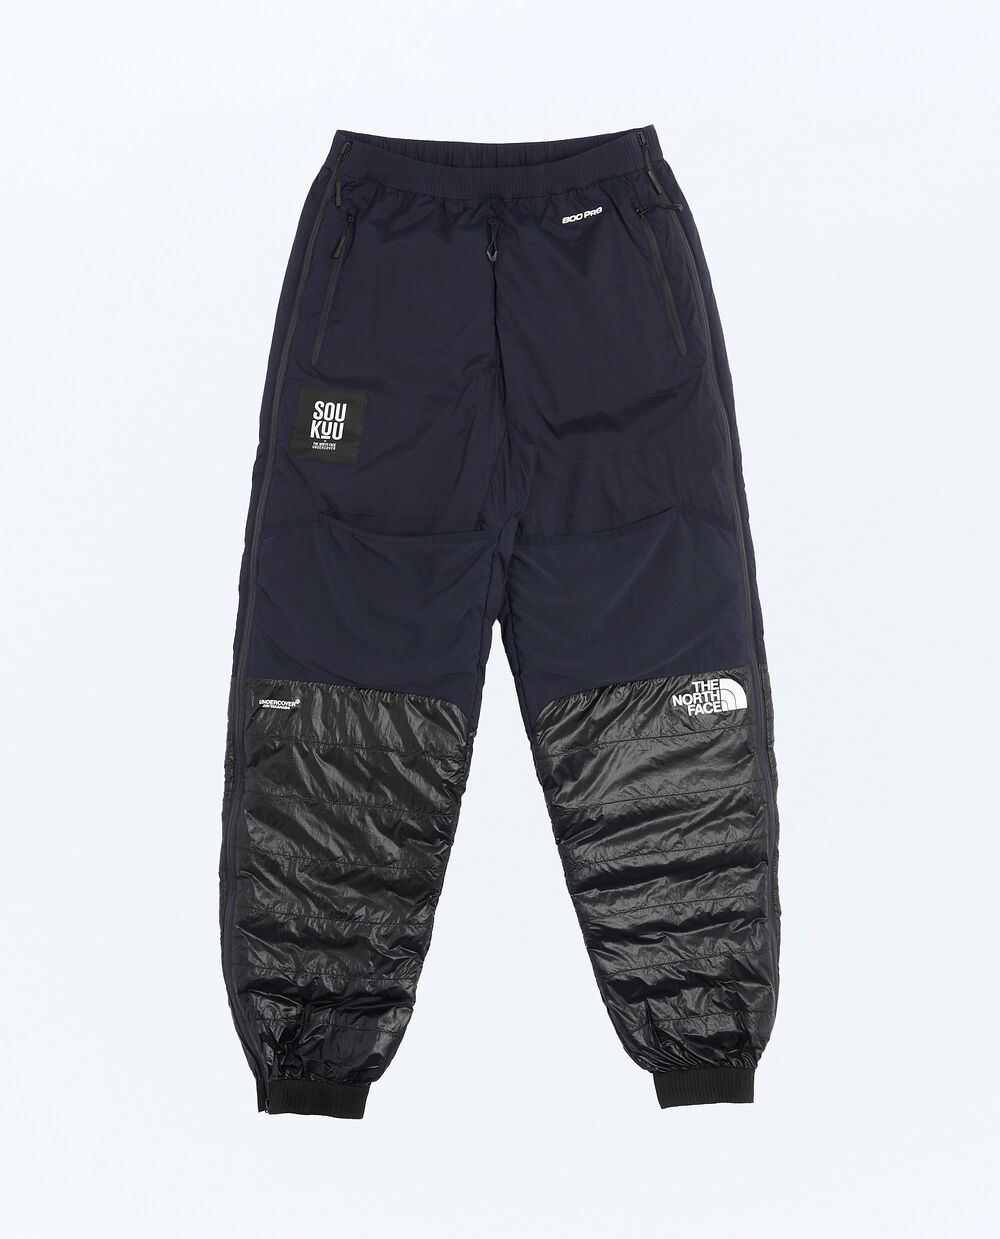 THE NORTH FACE TNF X UNDERCOVER 50/50 DOWN PANT